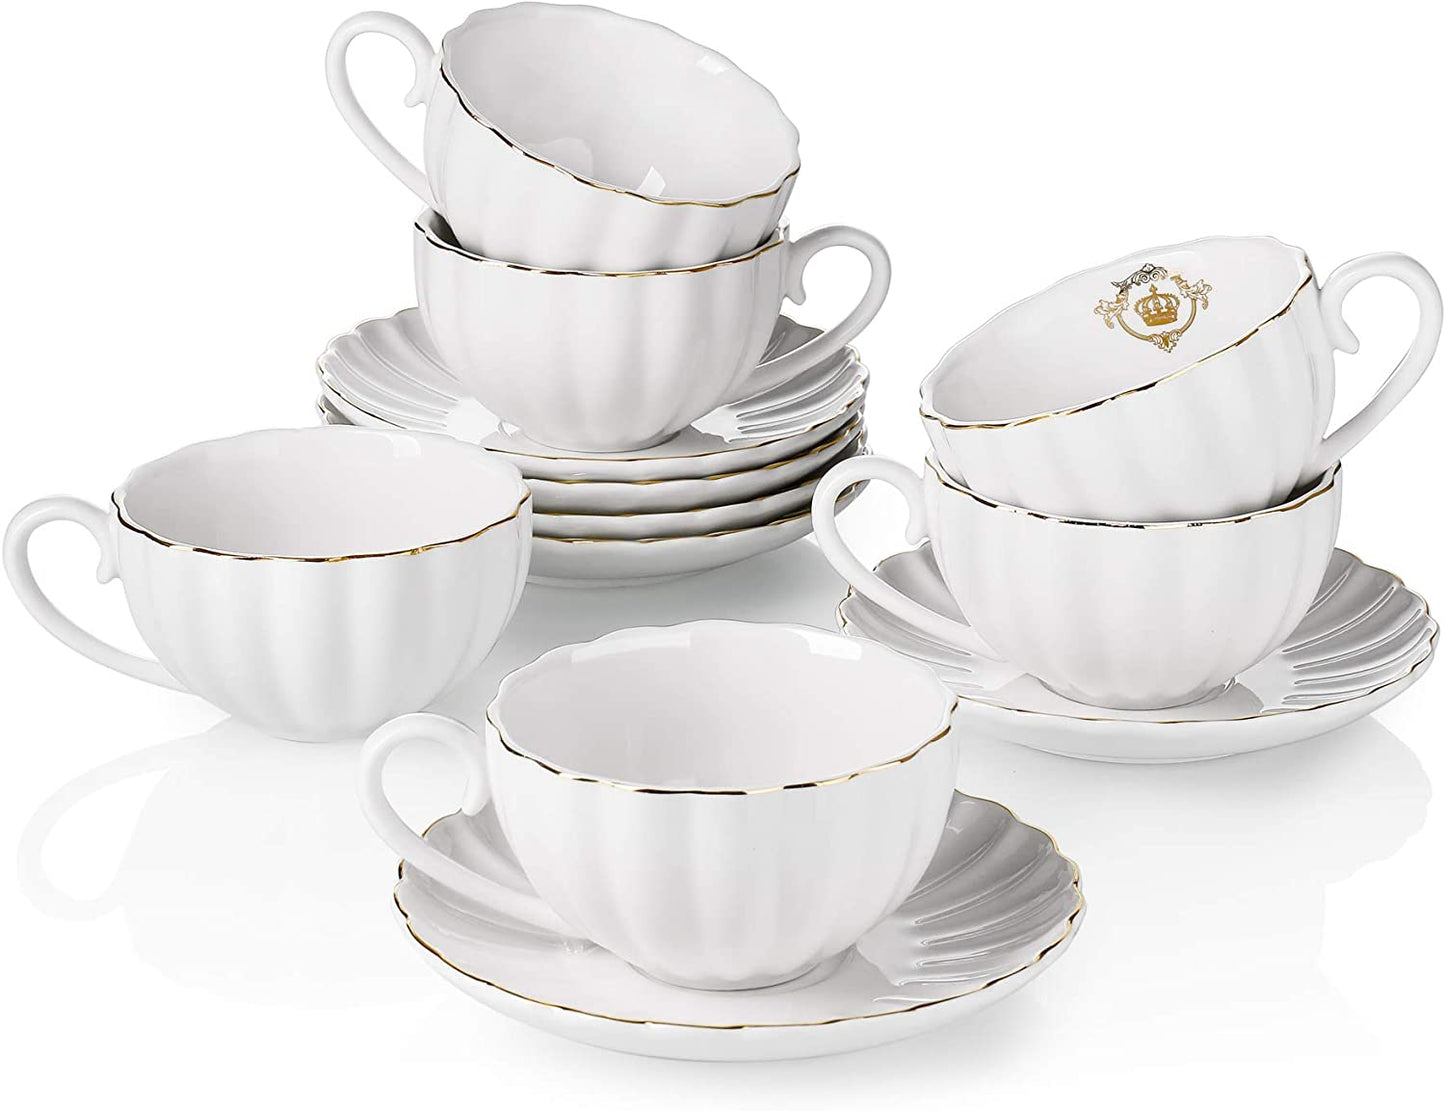 Amazingware Royal Tea Cups and Saucers, with Gold Trim and Gift Box, British Coffee Cups, Porcelain Tea Set, Set of 6 (8 oz)- White